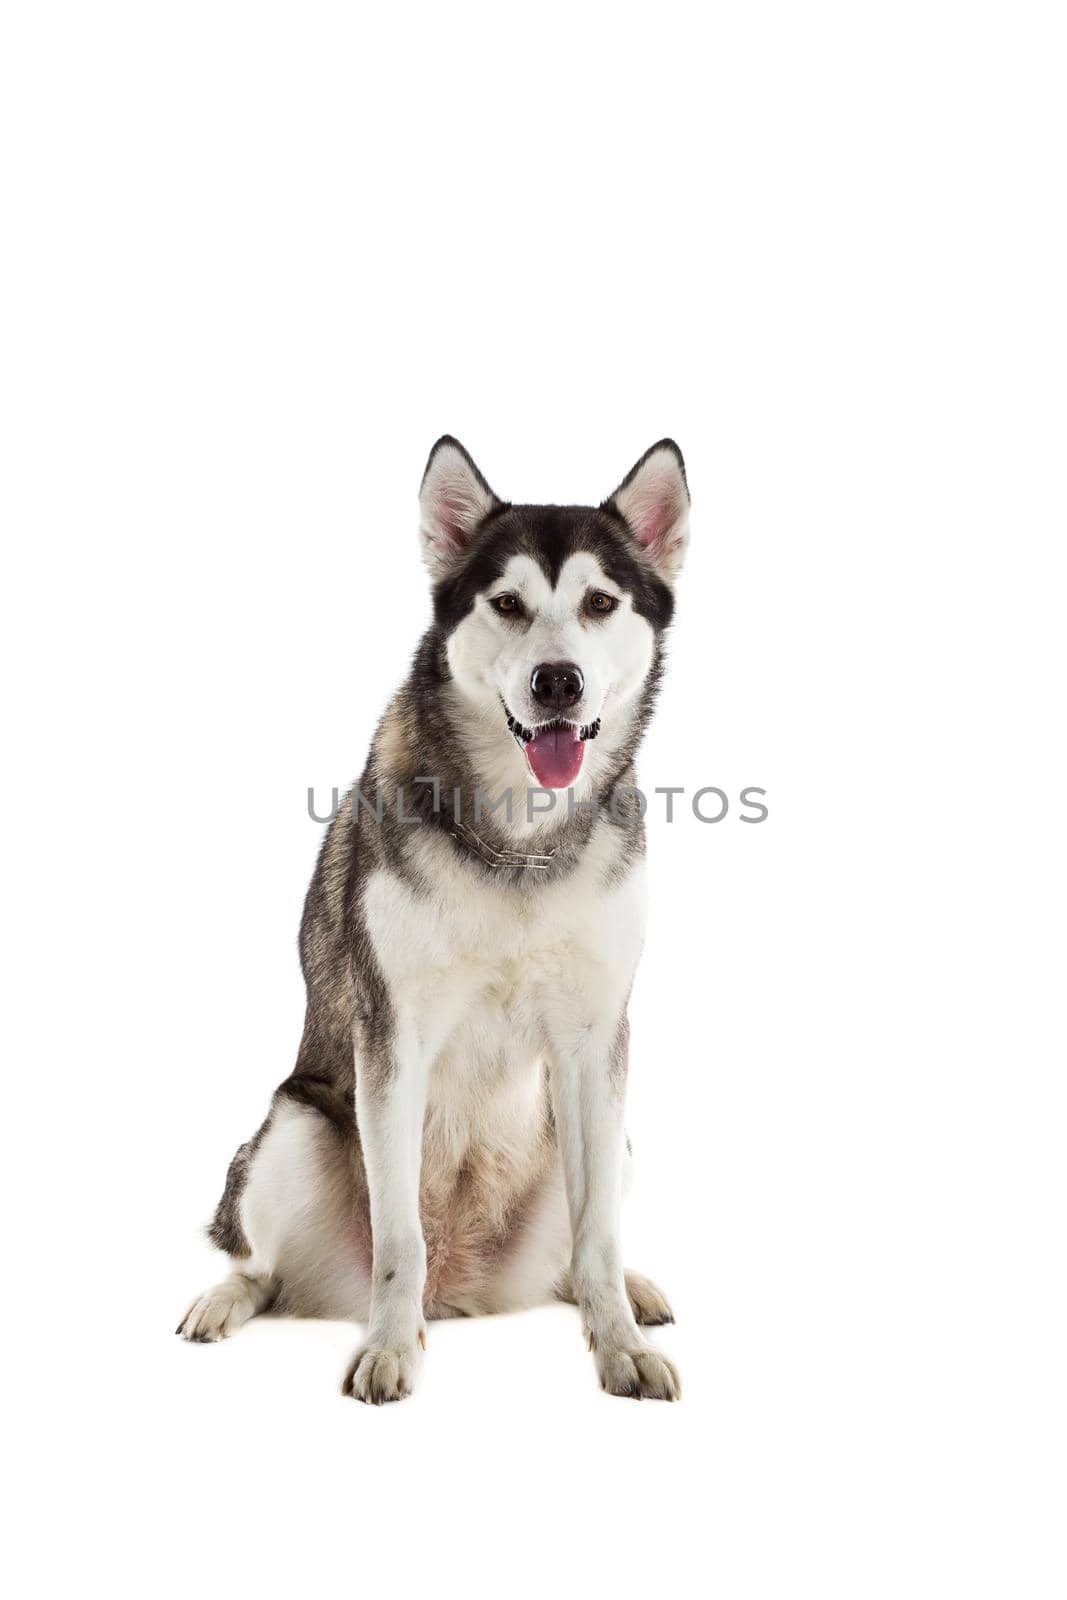 Alaskan Malamute sitting in front of white background. Dog sitting and looking at the camera